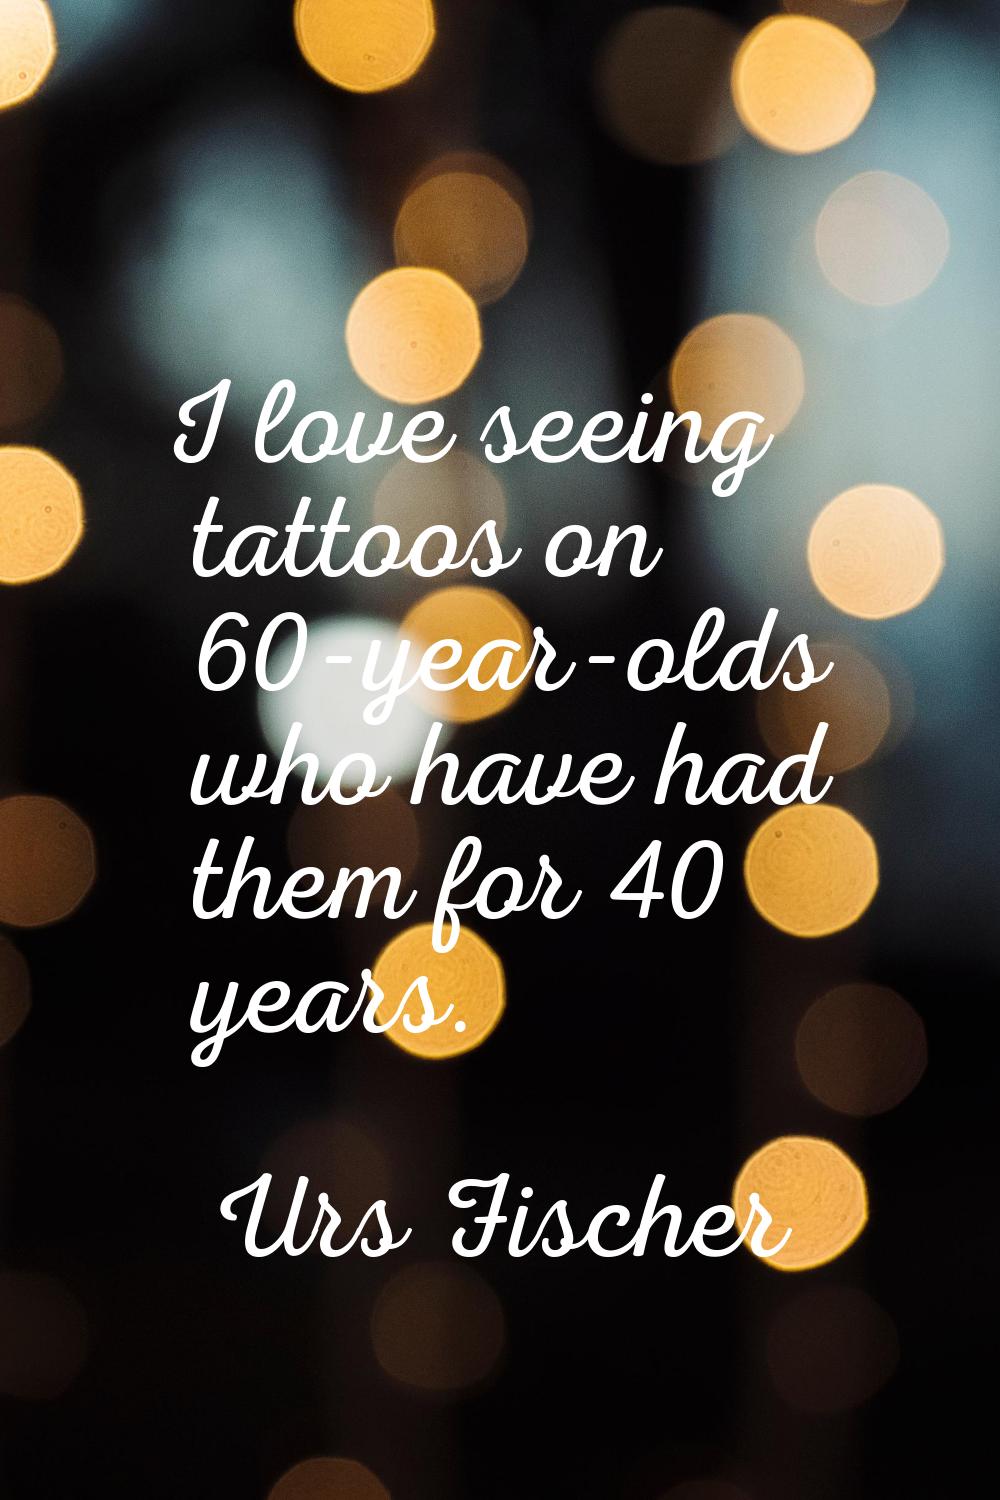 I love seeing tattoos on 60-year-olds who have had them for 40 years.